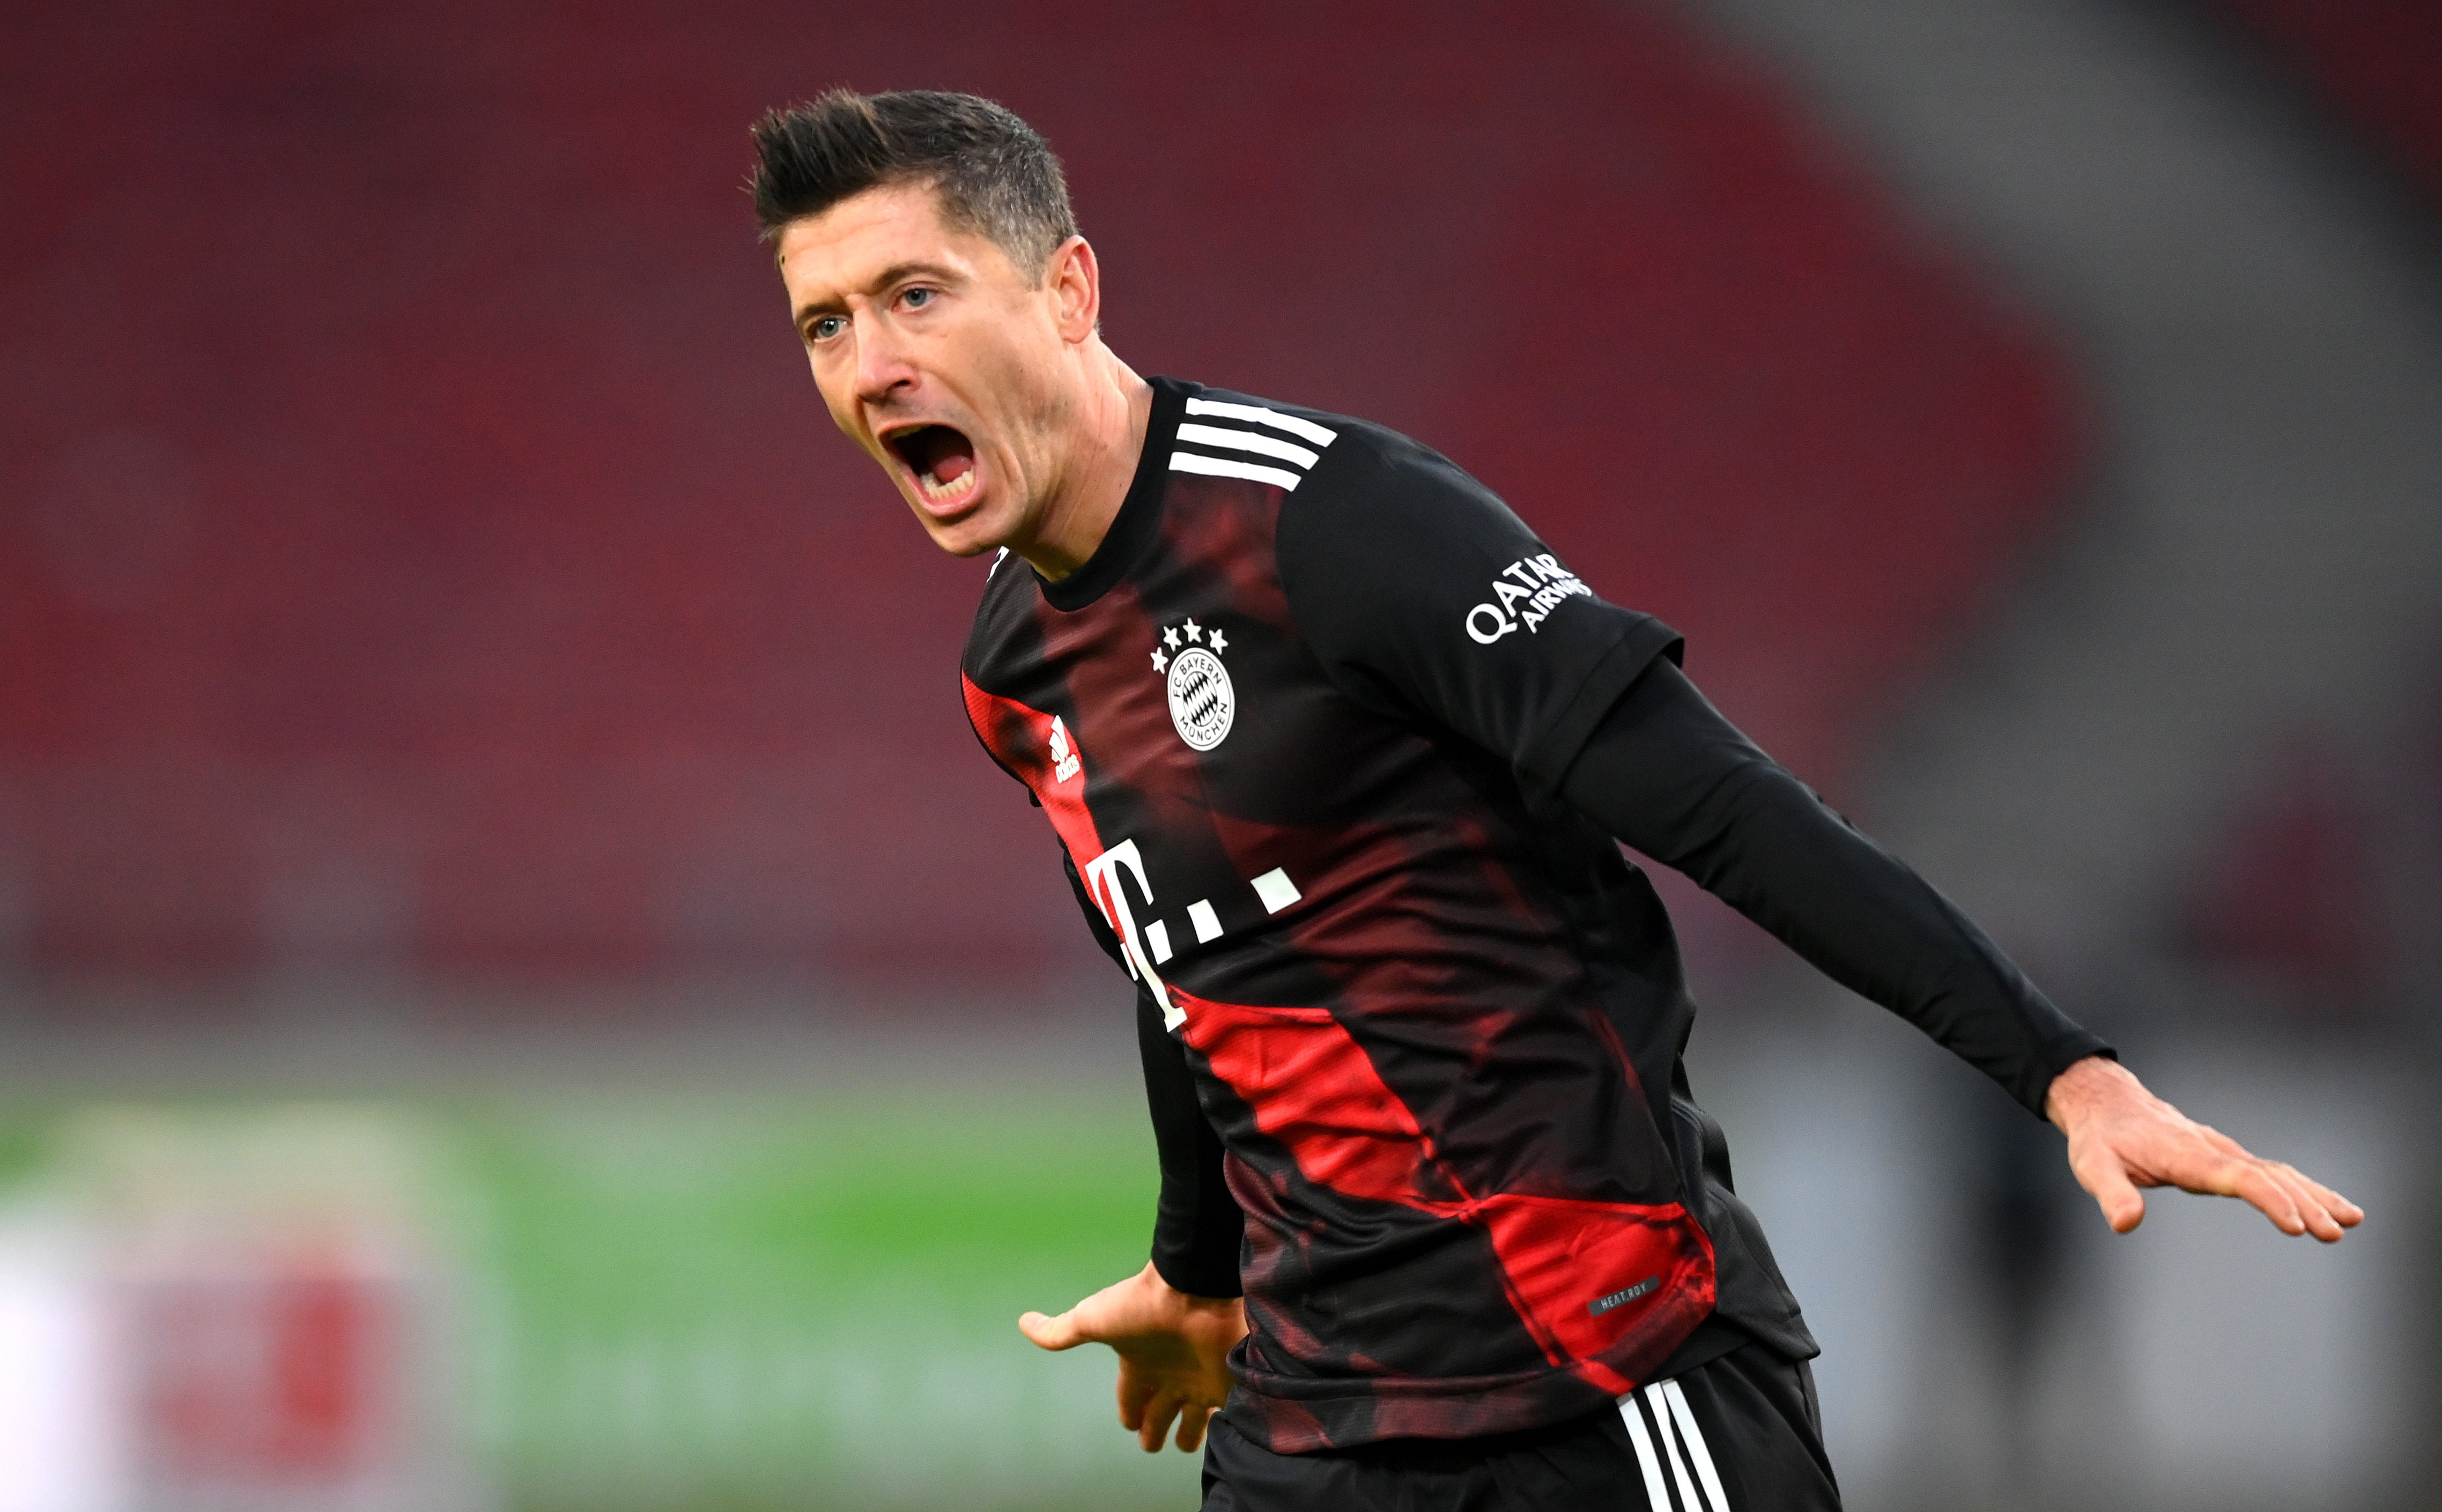 Robert Lewandowski is up for the award after a memorable year